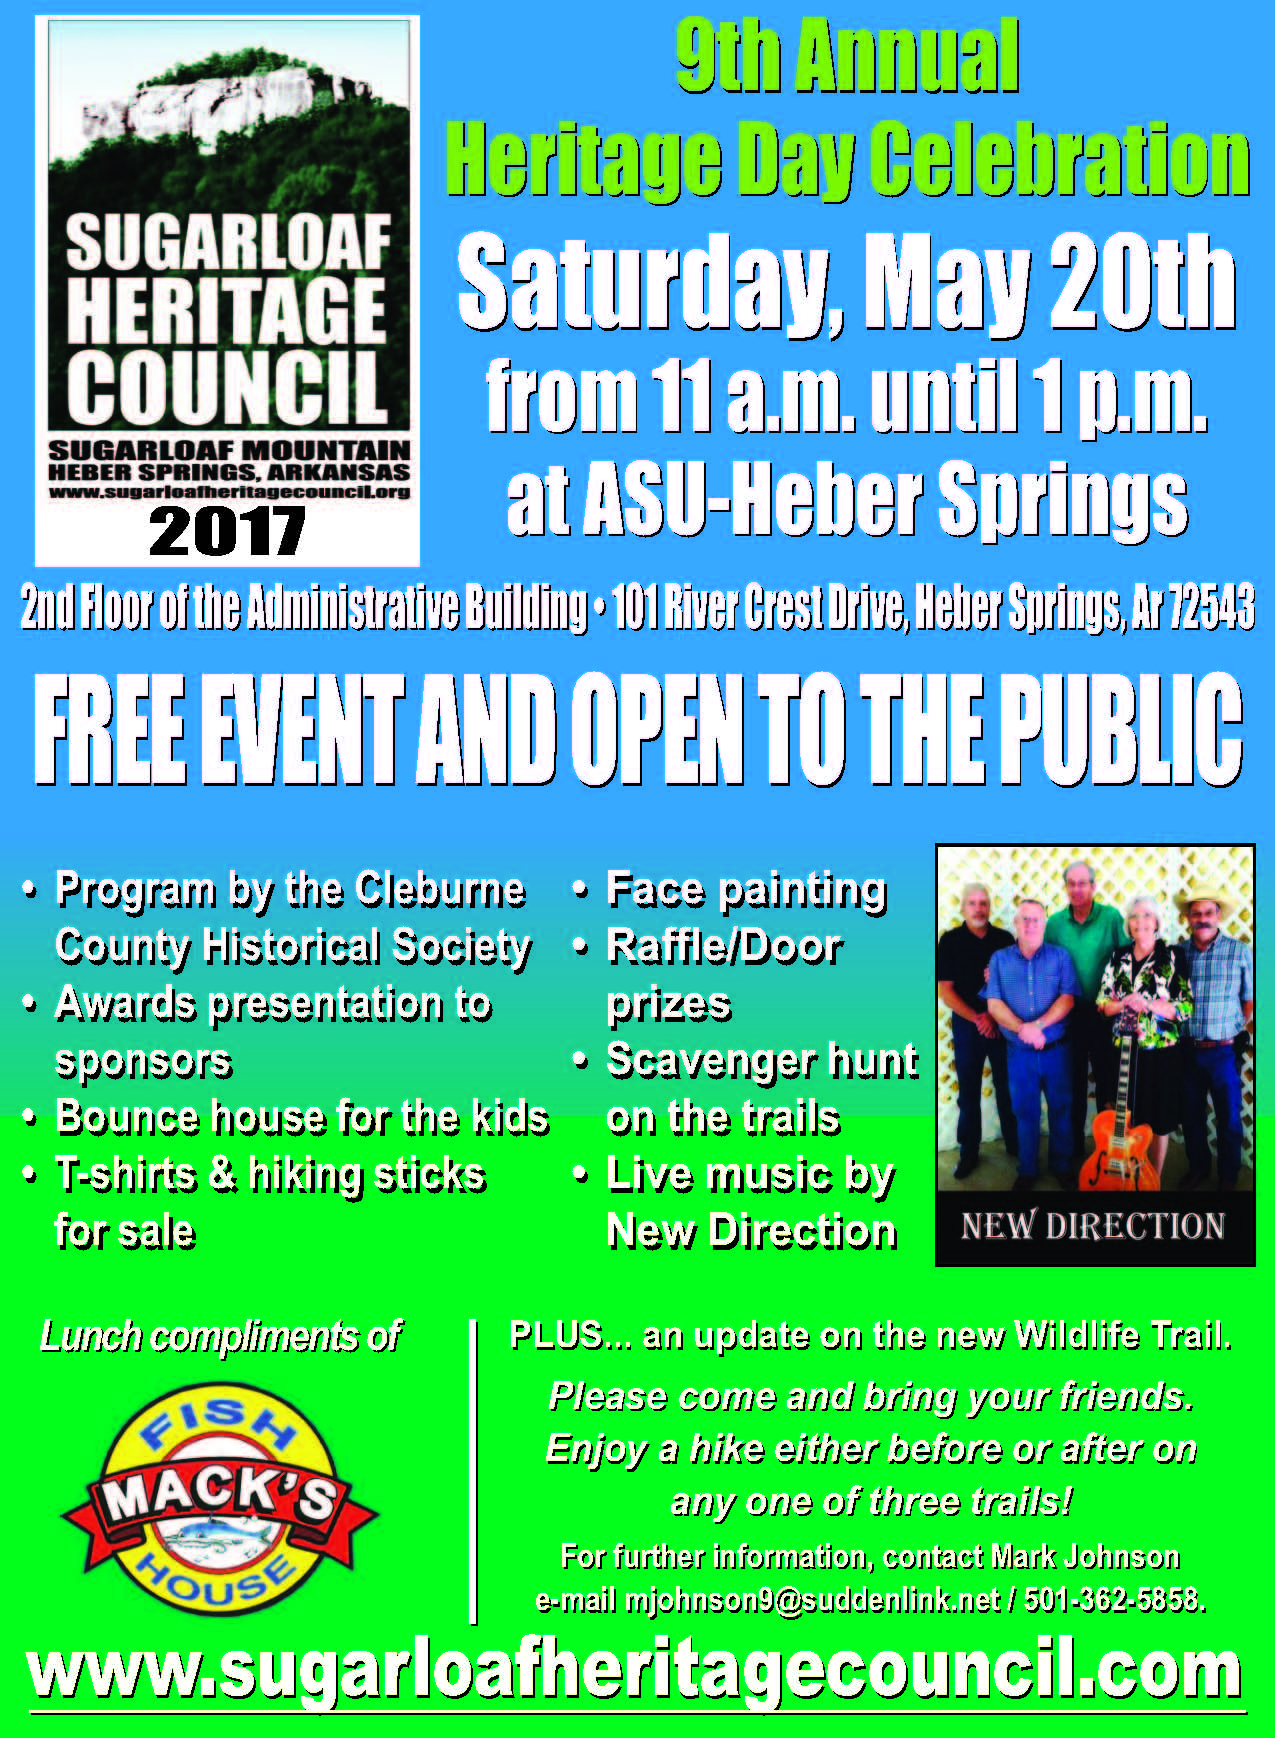 9th Annual Heritage Day Celebration